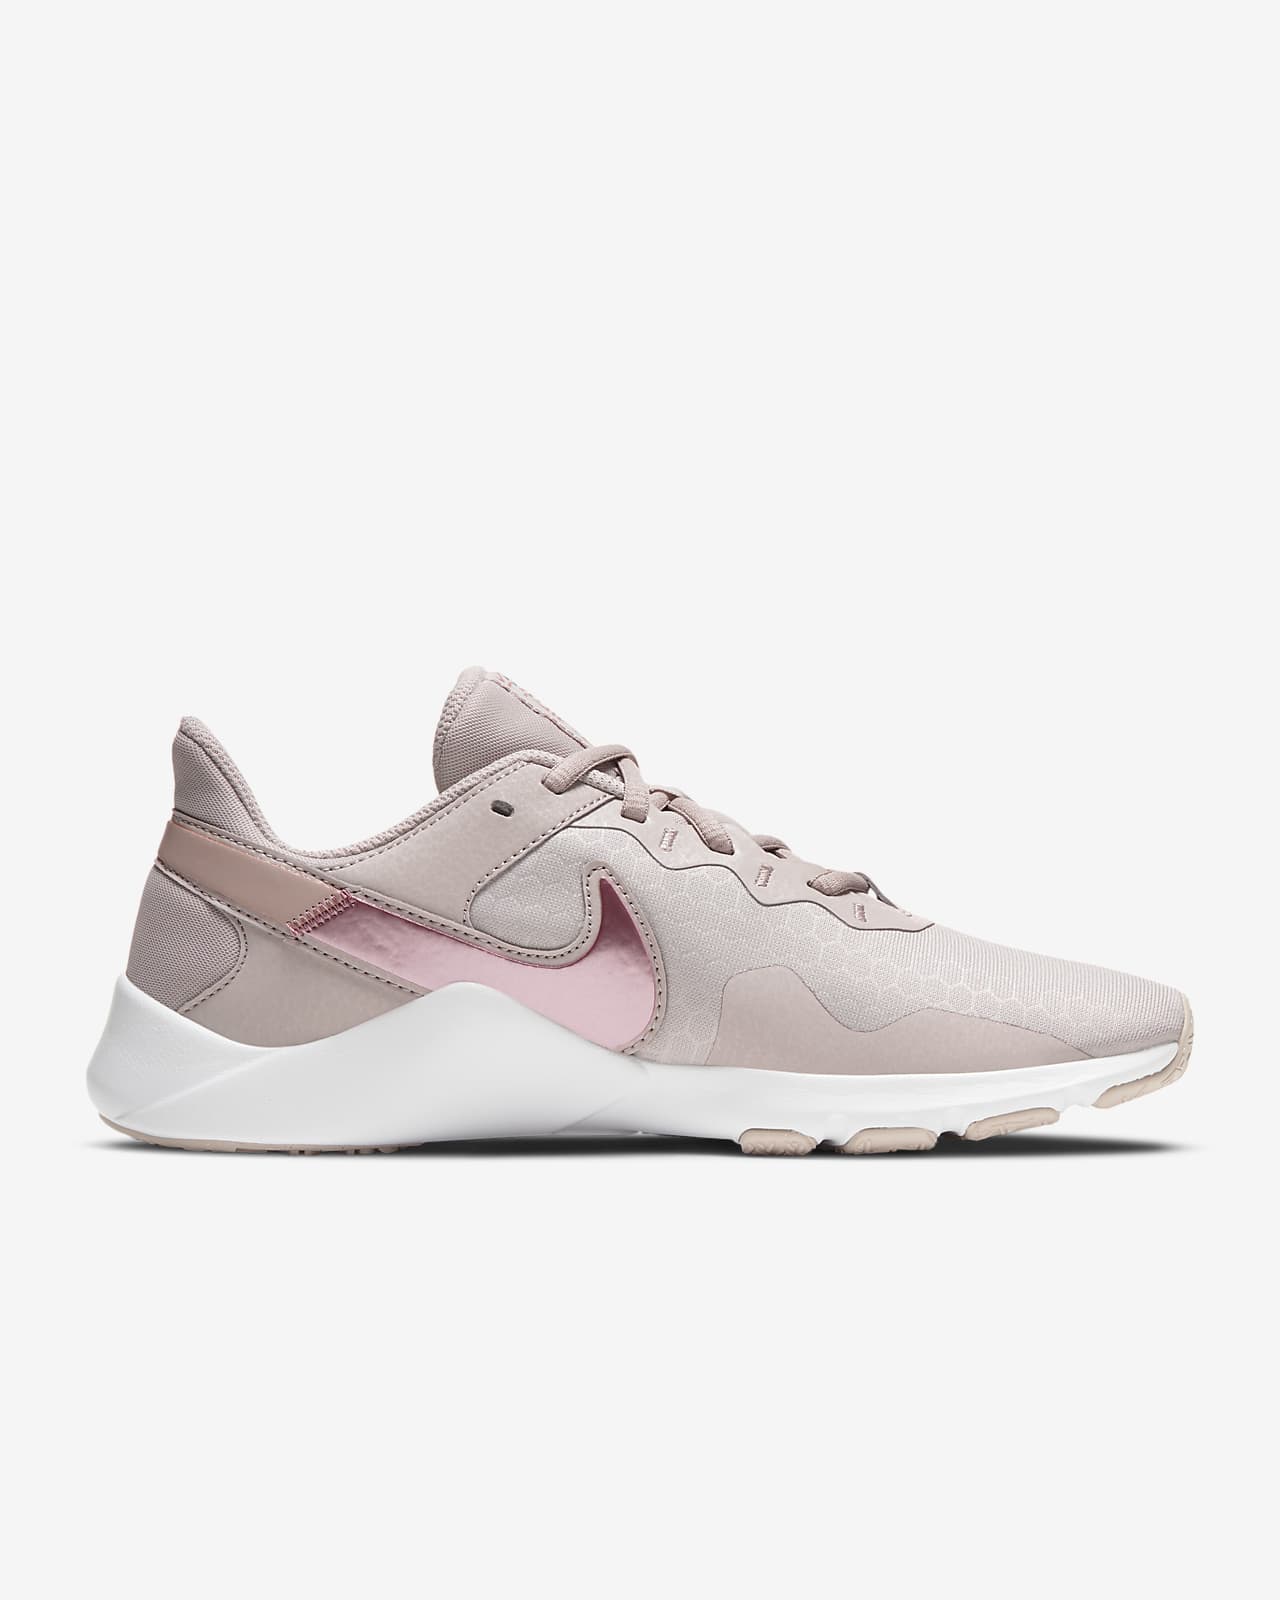 nike legend essential women's training shoes pink